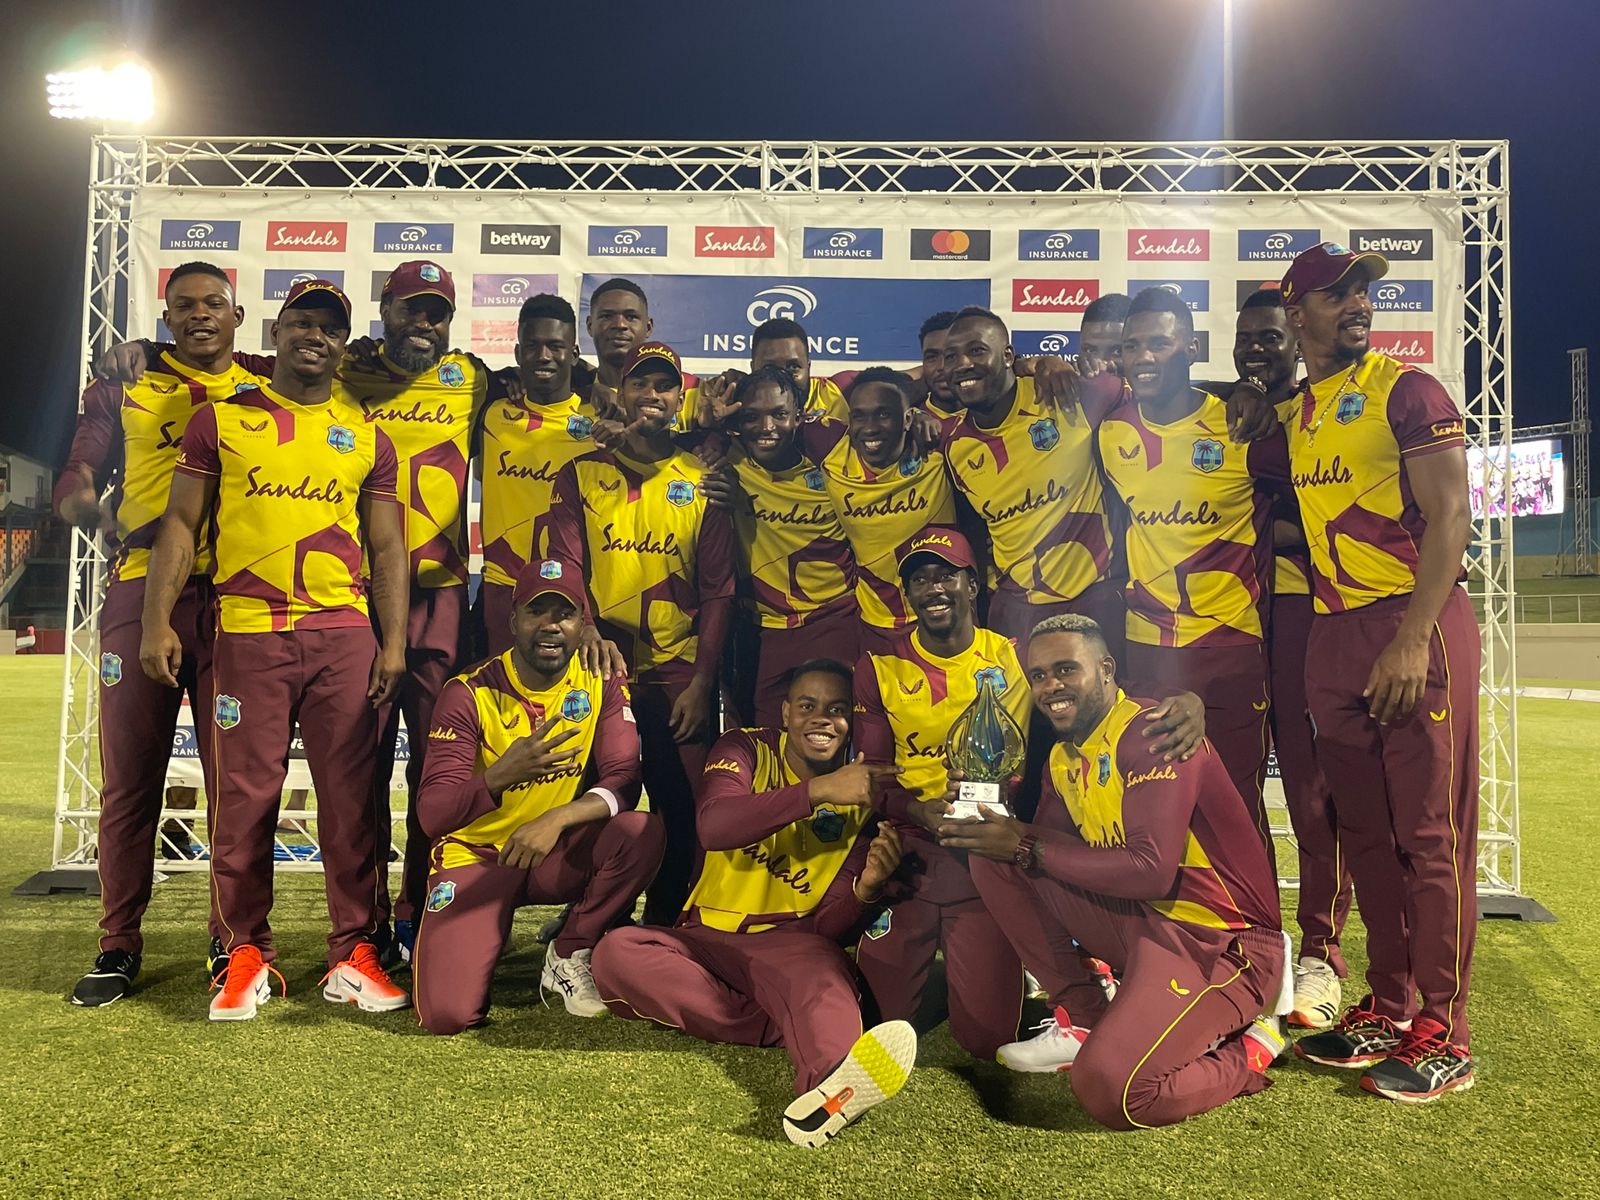 West Indies defeated Australia 4-1 in the T20I series | Windies Cricket/Twitter